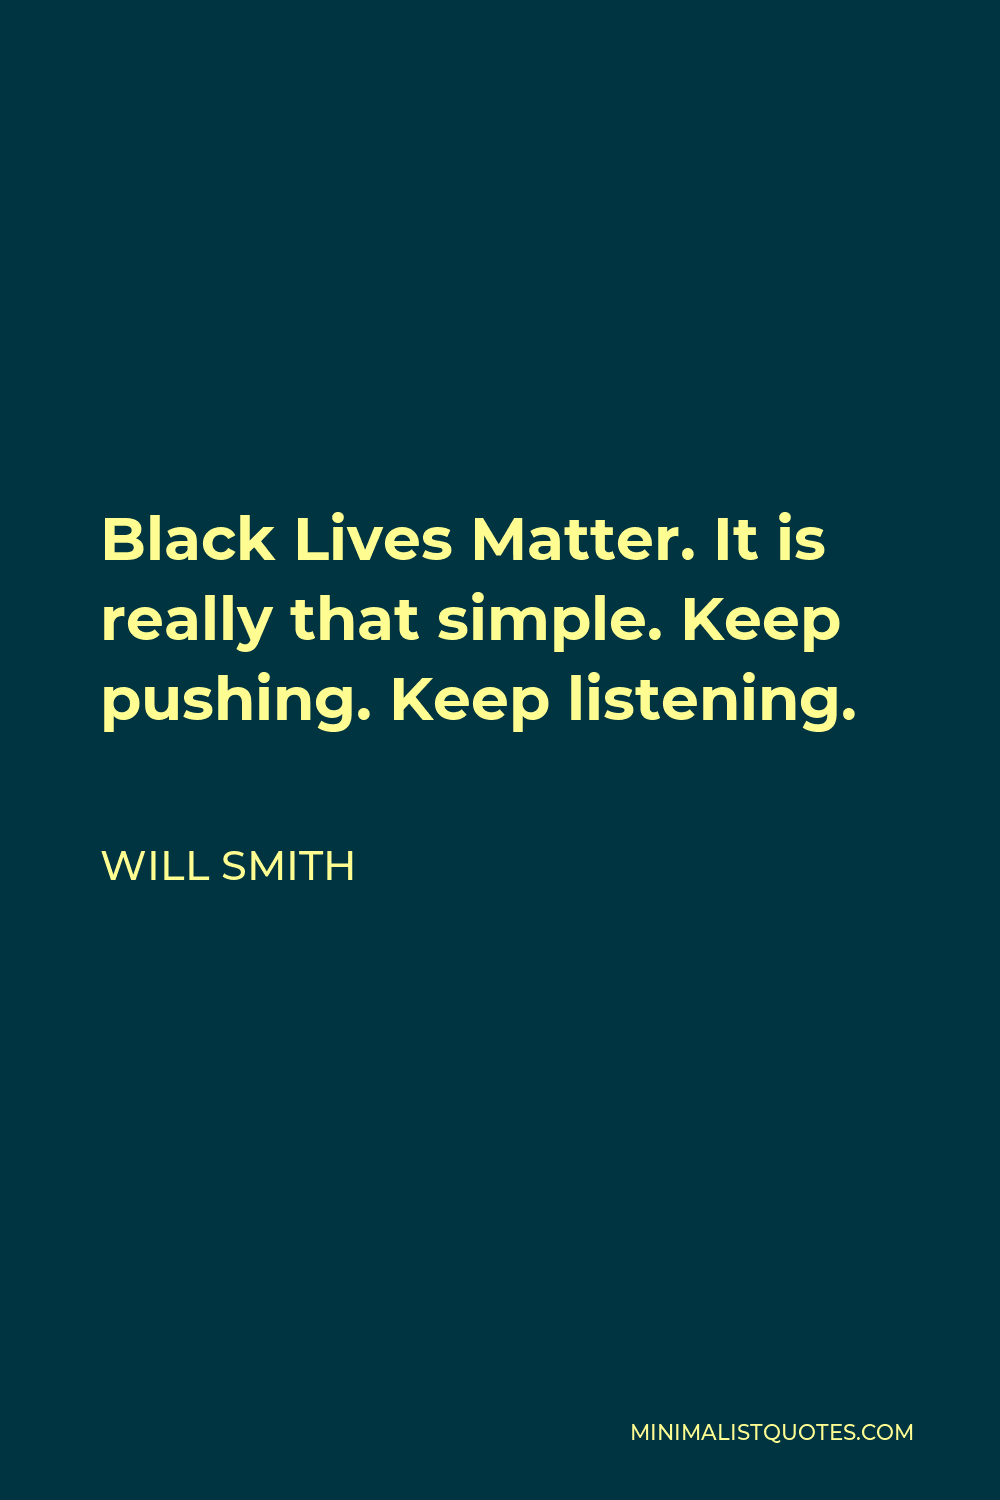 Will Smith Quote - Black Lives Matter. It is really that simple. Keep pushing. Keep listening.